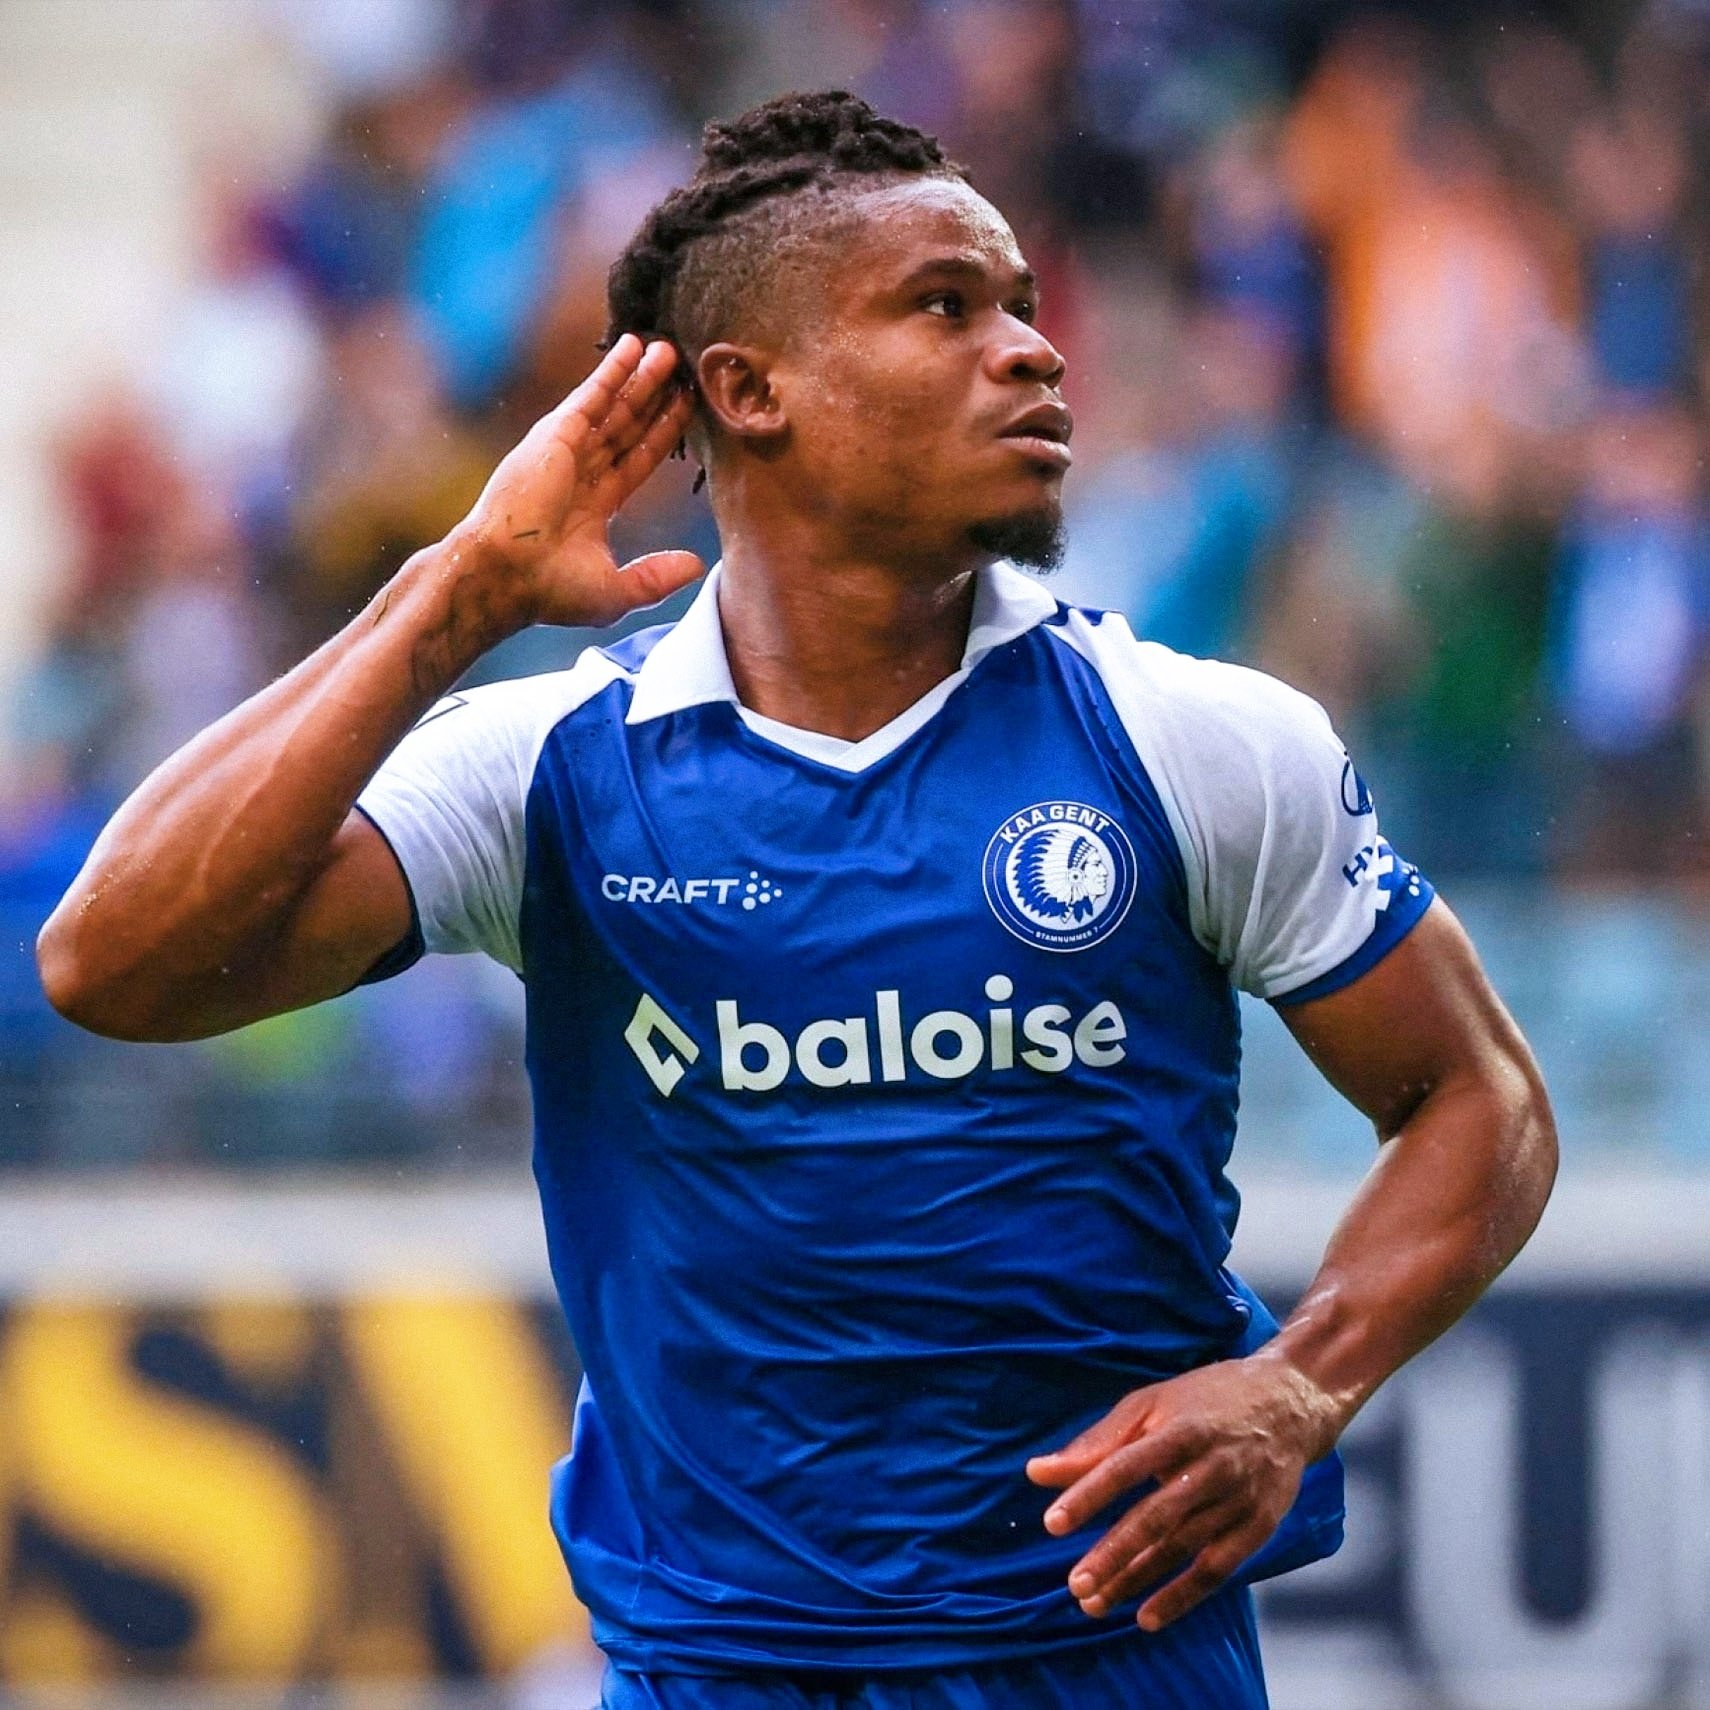 Gift Orban Shines with First League Goal in KAA Gent home win